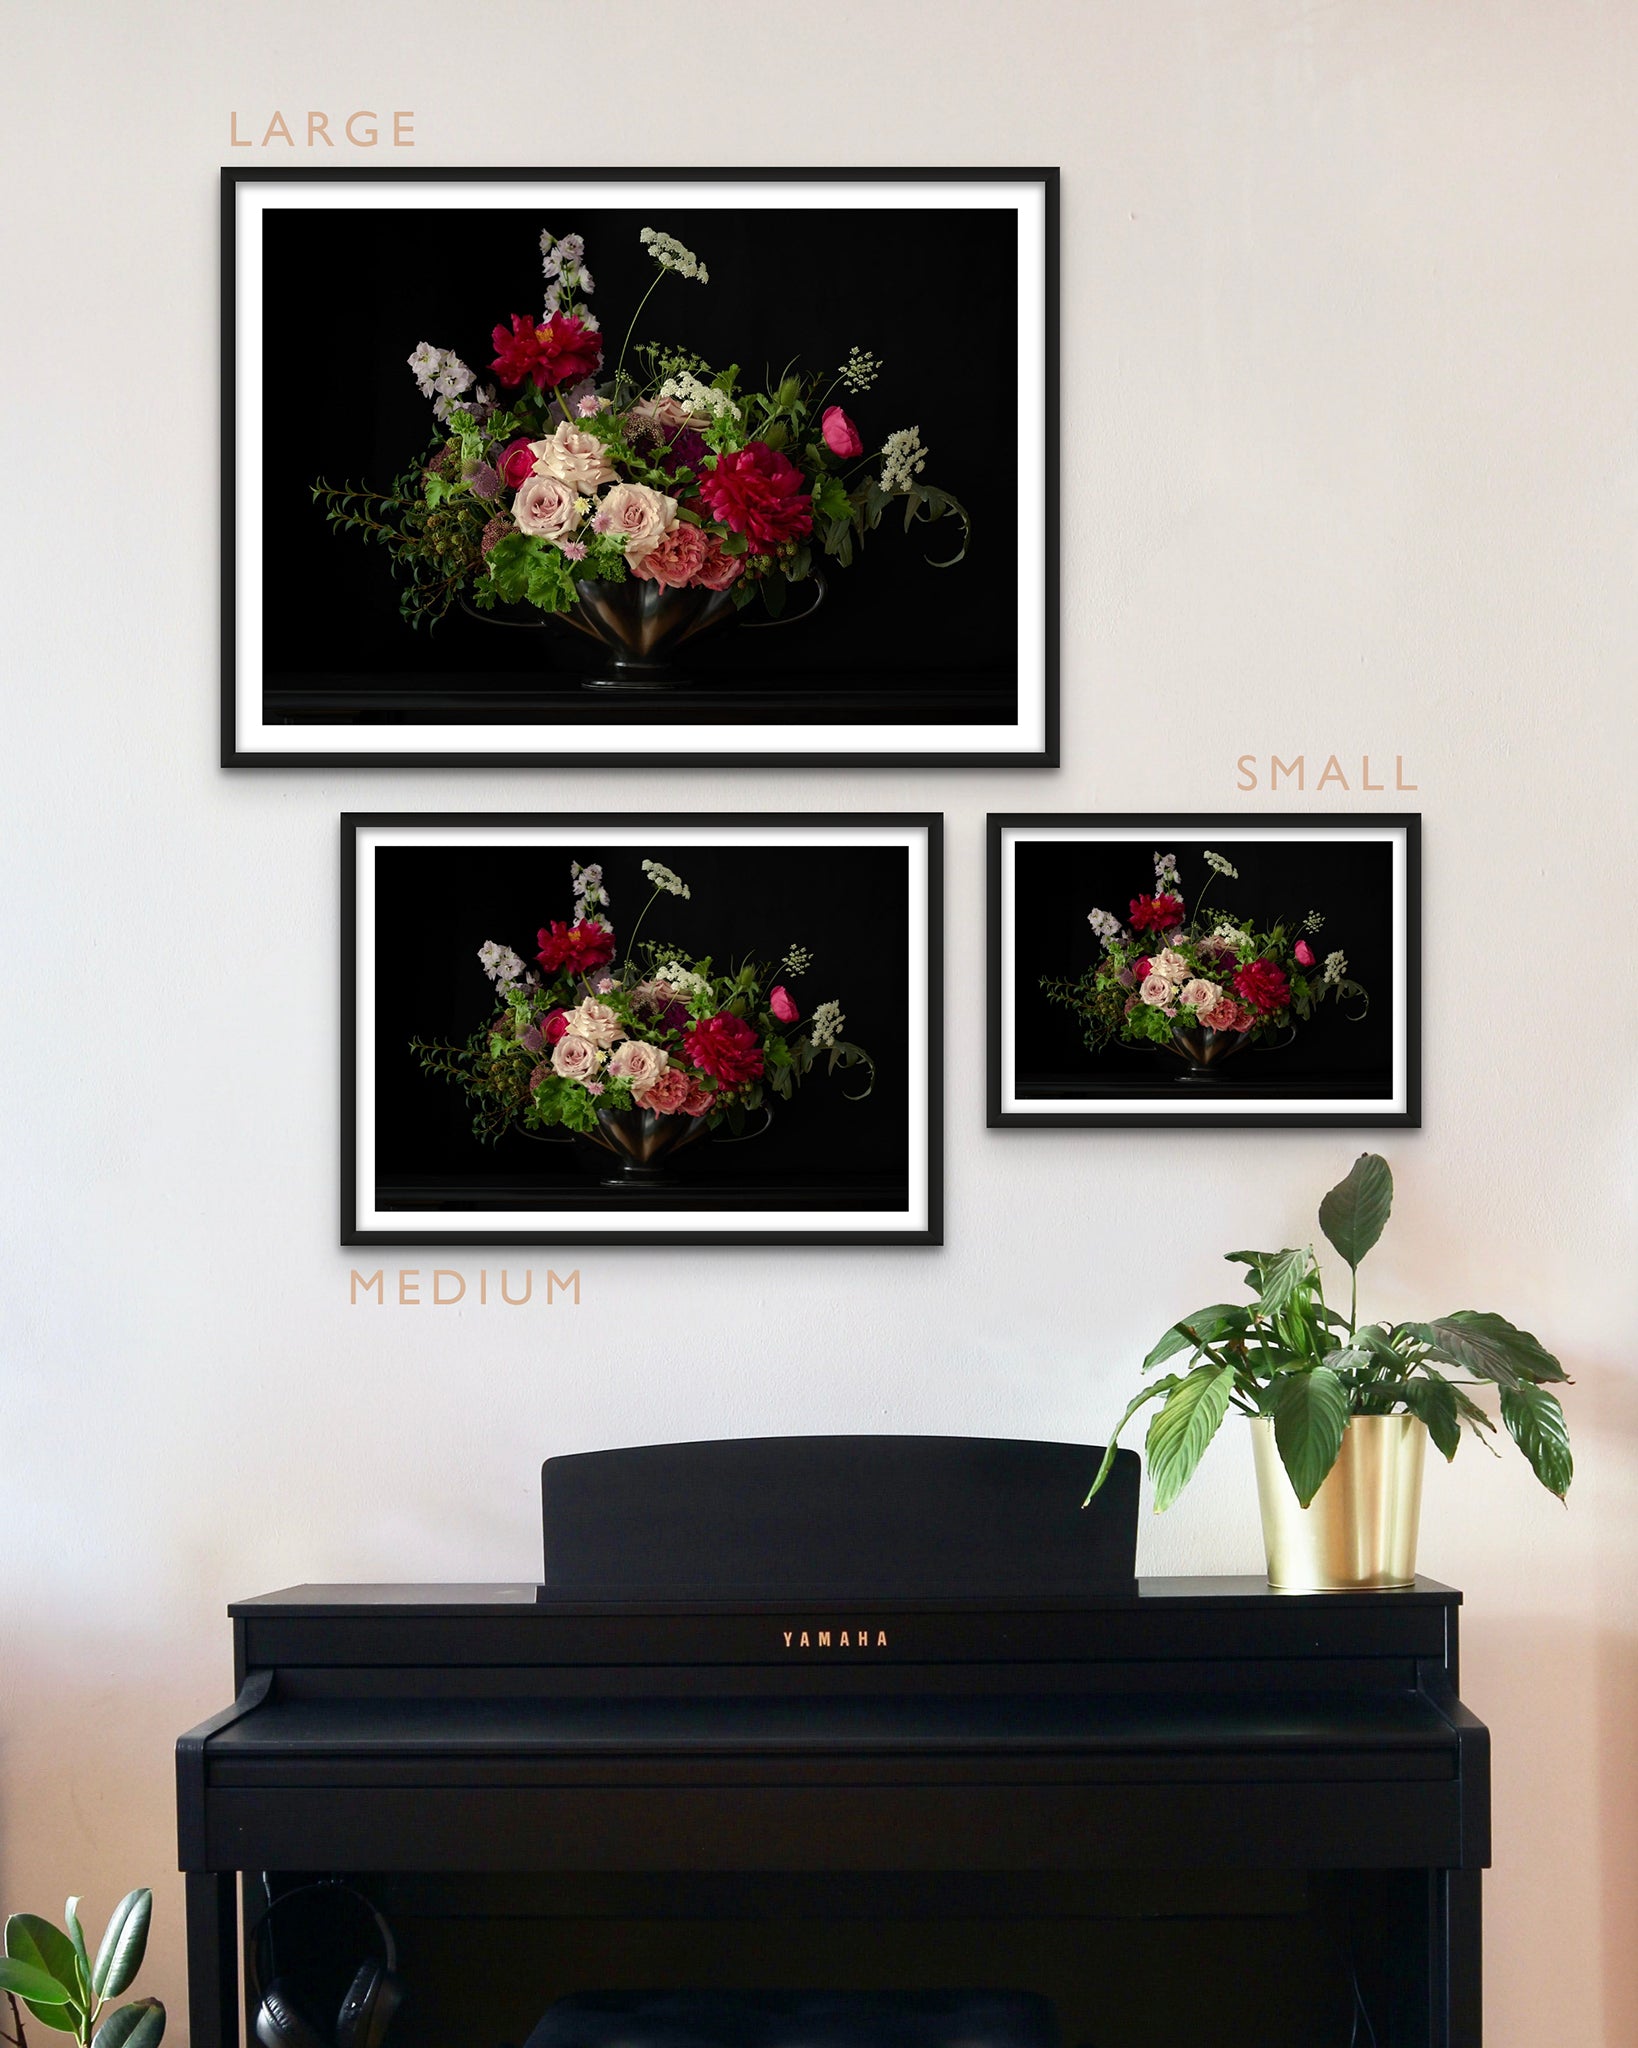 Print Size Guide - Interior picture of Small/Medium/Large 'ROSE' Limited Edition Fine Art Photographic Print Framed. Displayed on a white wall above Black Piano.